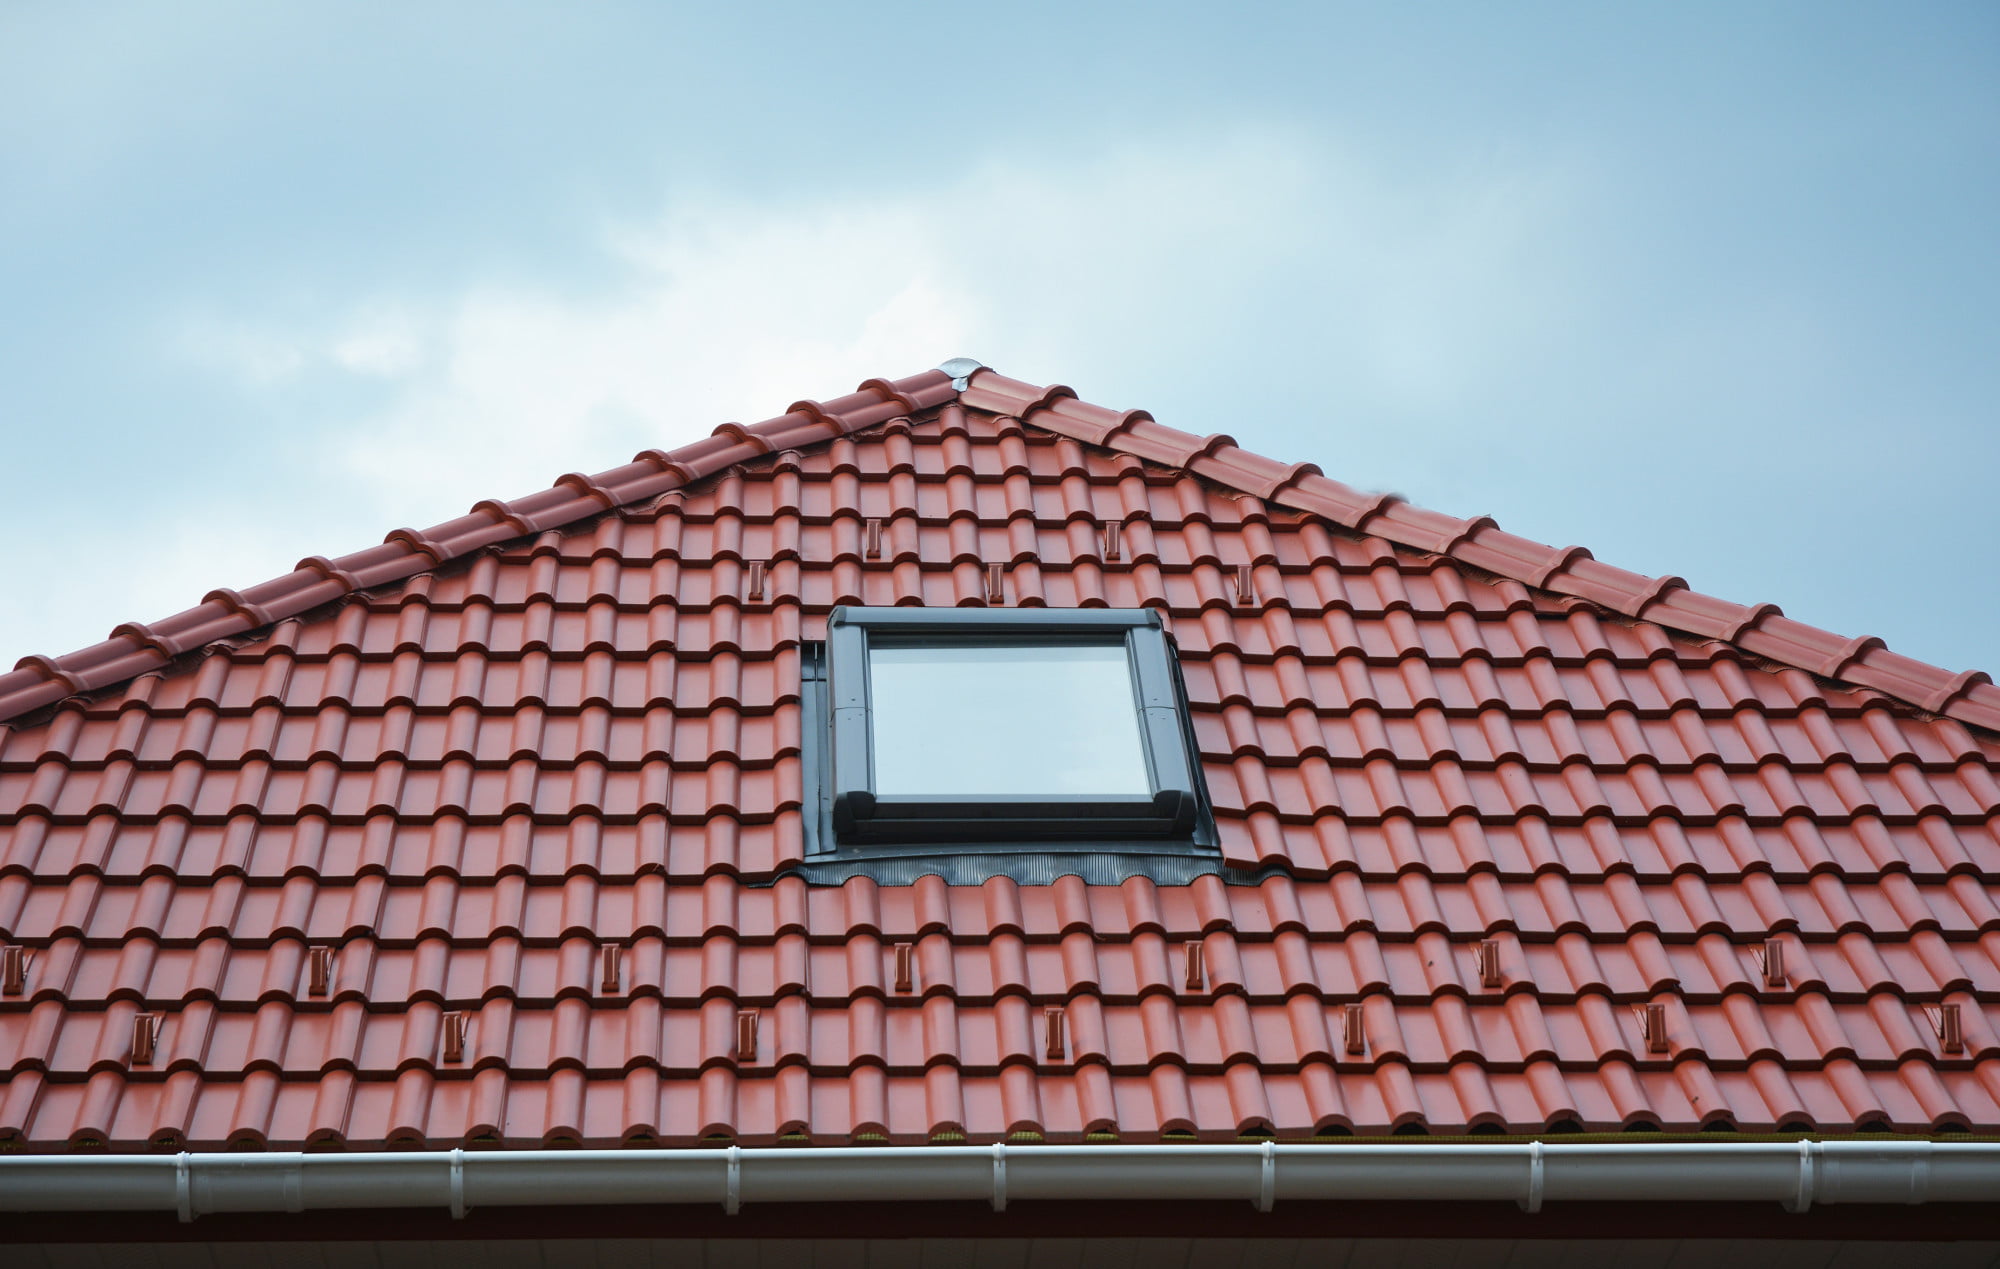 An annual roof inspection is essential to help spot and fix roofing issues early. Here's what you need to know about these inspections.